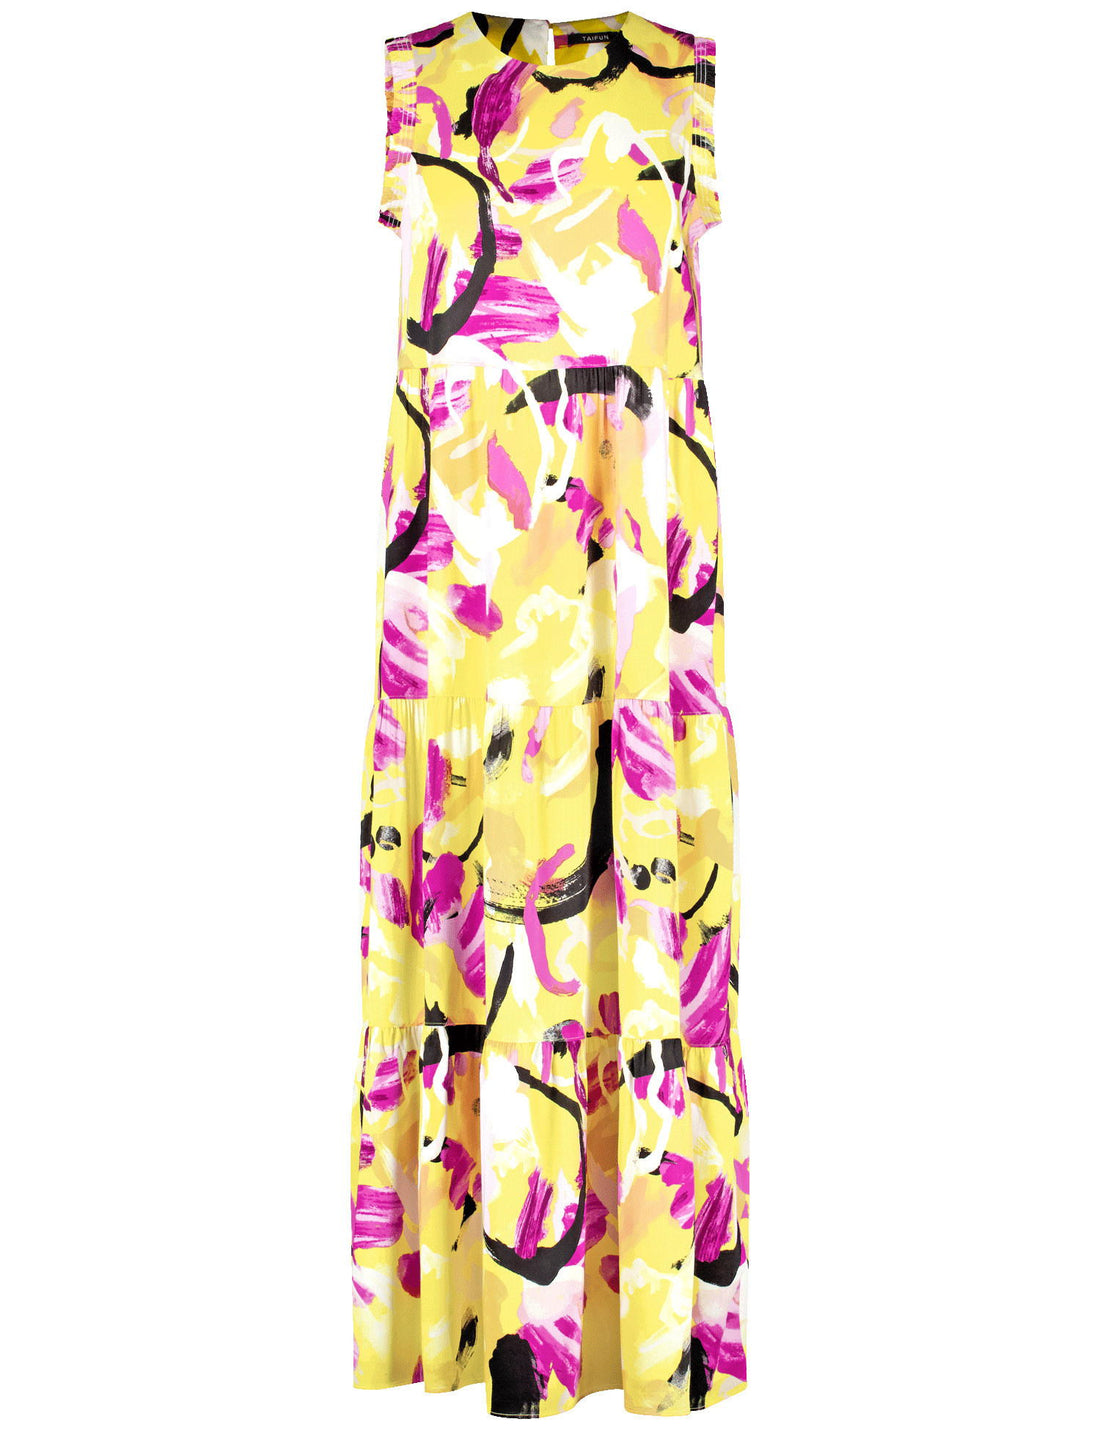 Sleeveless Maxi Dress With A Floral Print_580310-11019_4142_02